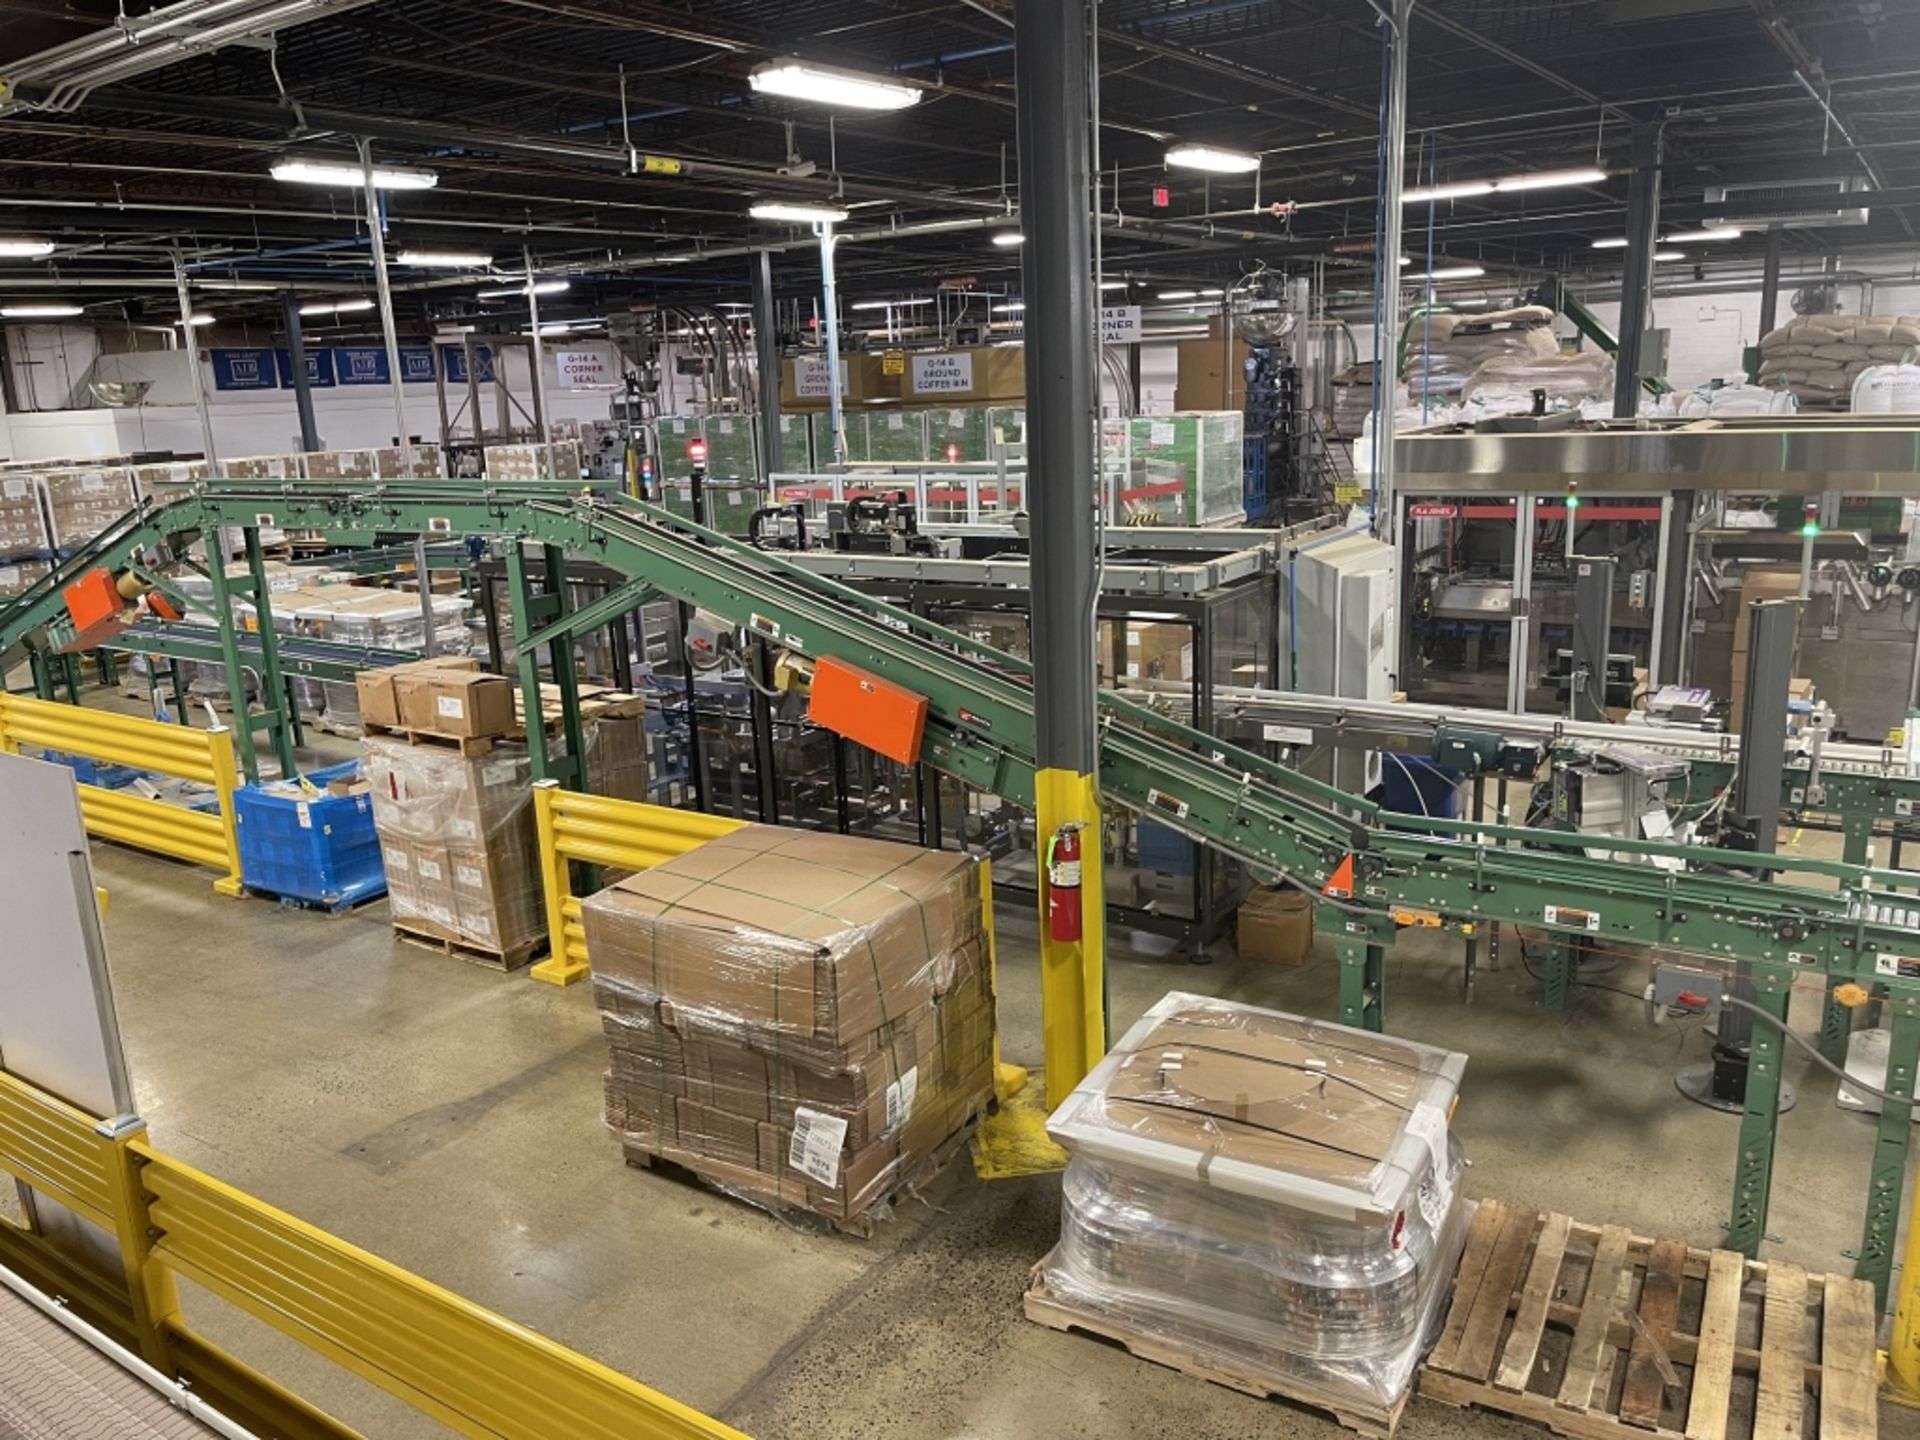 CASE CONVEYOR SYSTEMS ON PRODUCTION LINE (2019 MFG)(INV#83150)(Loading, Handling & Site Management - Image 3 of 11